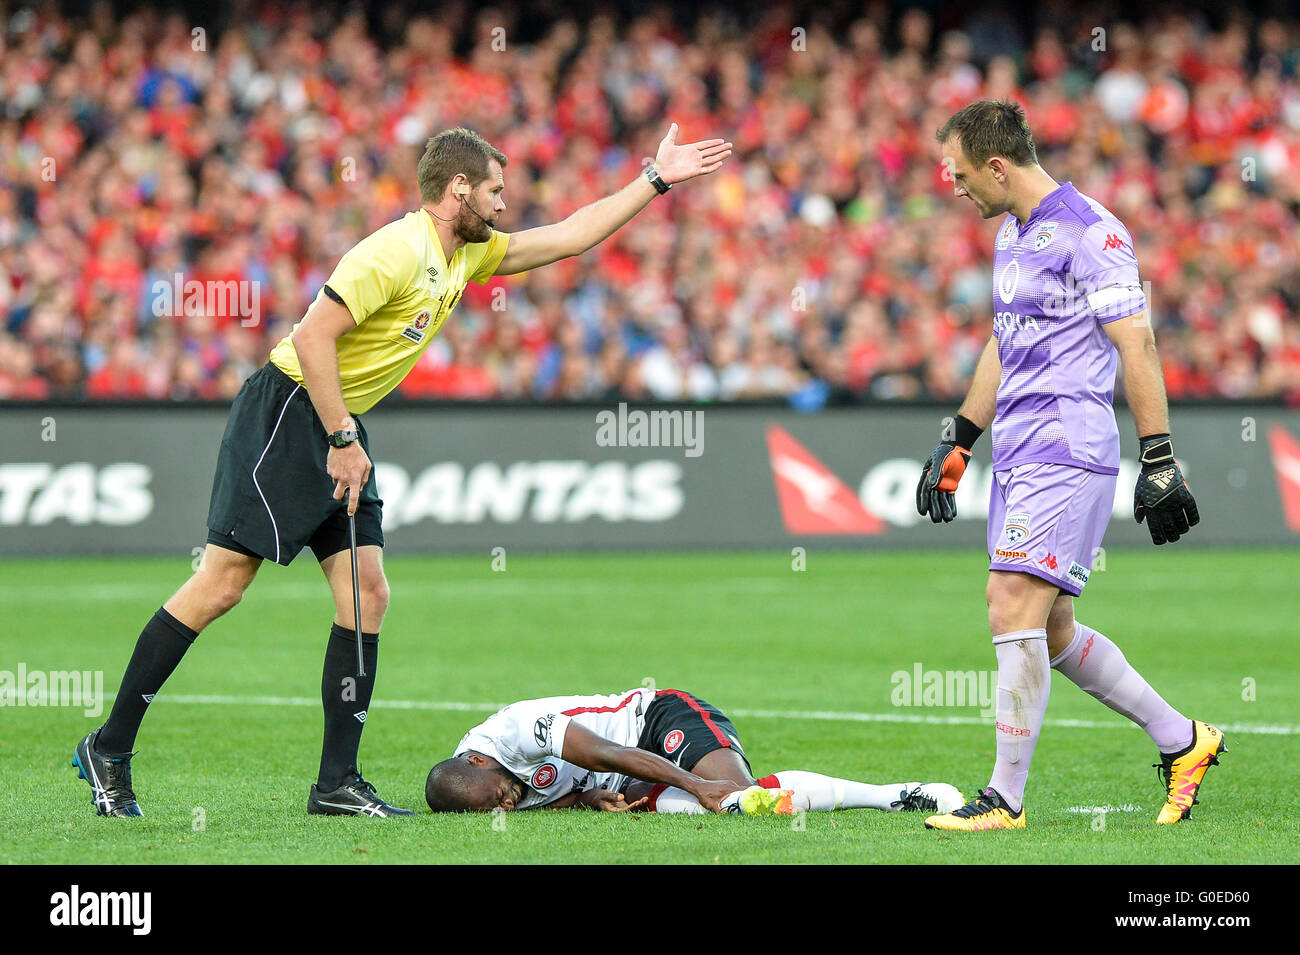 Adelaide Oval, Adelaide, Australia. 01st May, 2016. Hyundai A League Grand Final. Adelaide Versus Wanderers. Wanderers forward Romeo Castelen goes down under a heavy challenge as Adelaide captain Eugene Galekovic looks on. Adelaide won 3-1 © Action Plus Sports/Alamy Live News Stock Photo